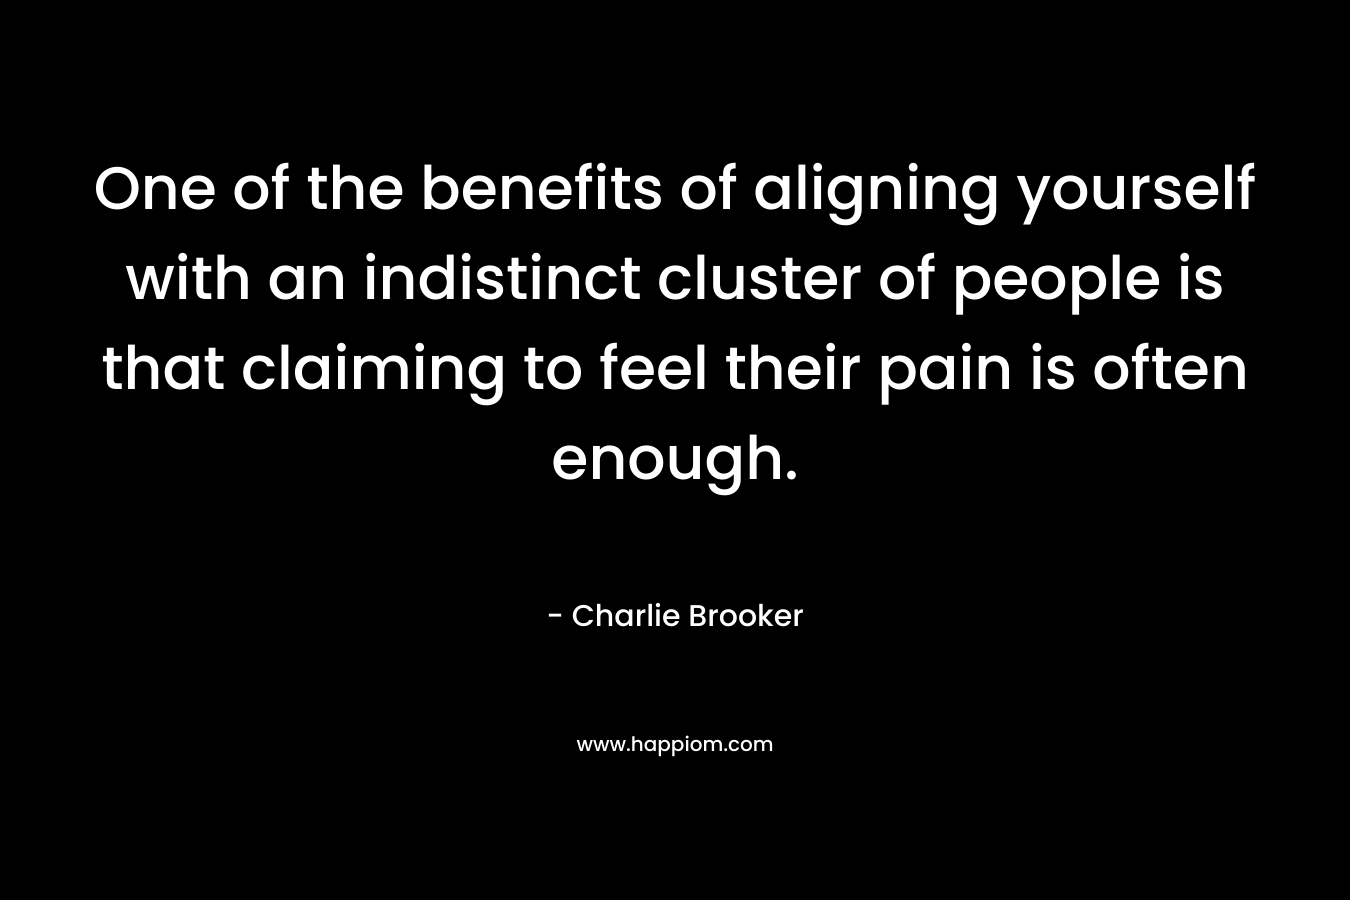 One of the benefits of aligning yourself with an indistinct cluster of people is that claiming to feel their pain is often enough.